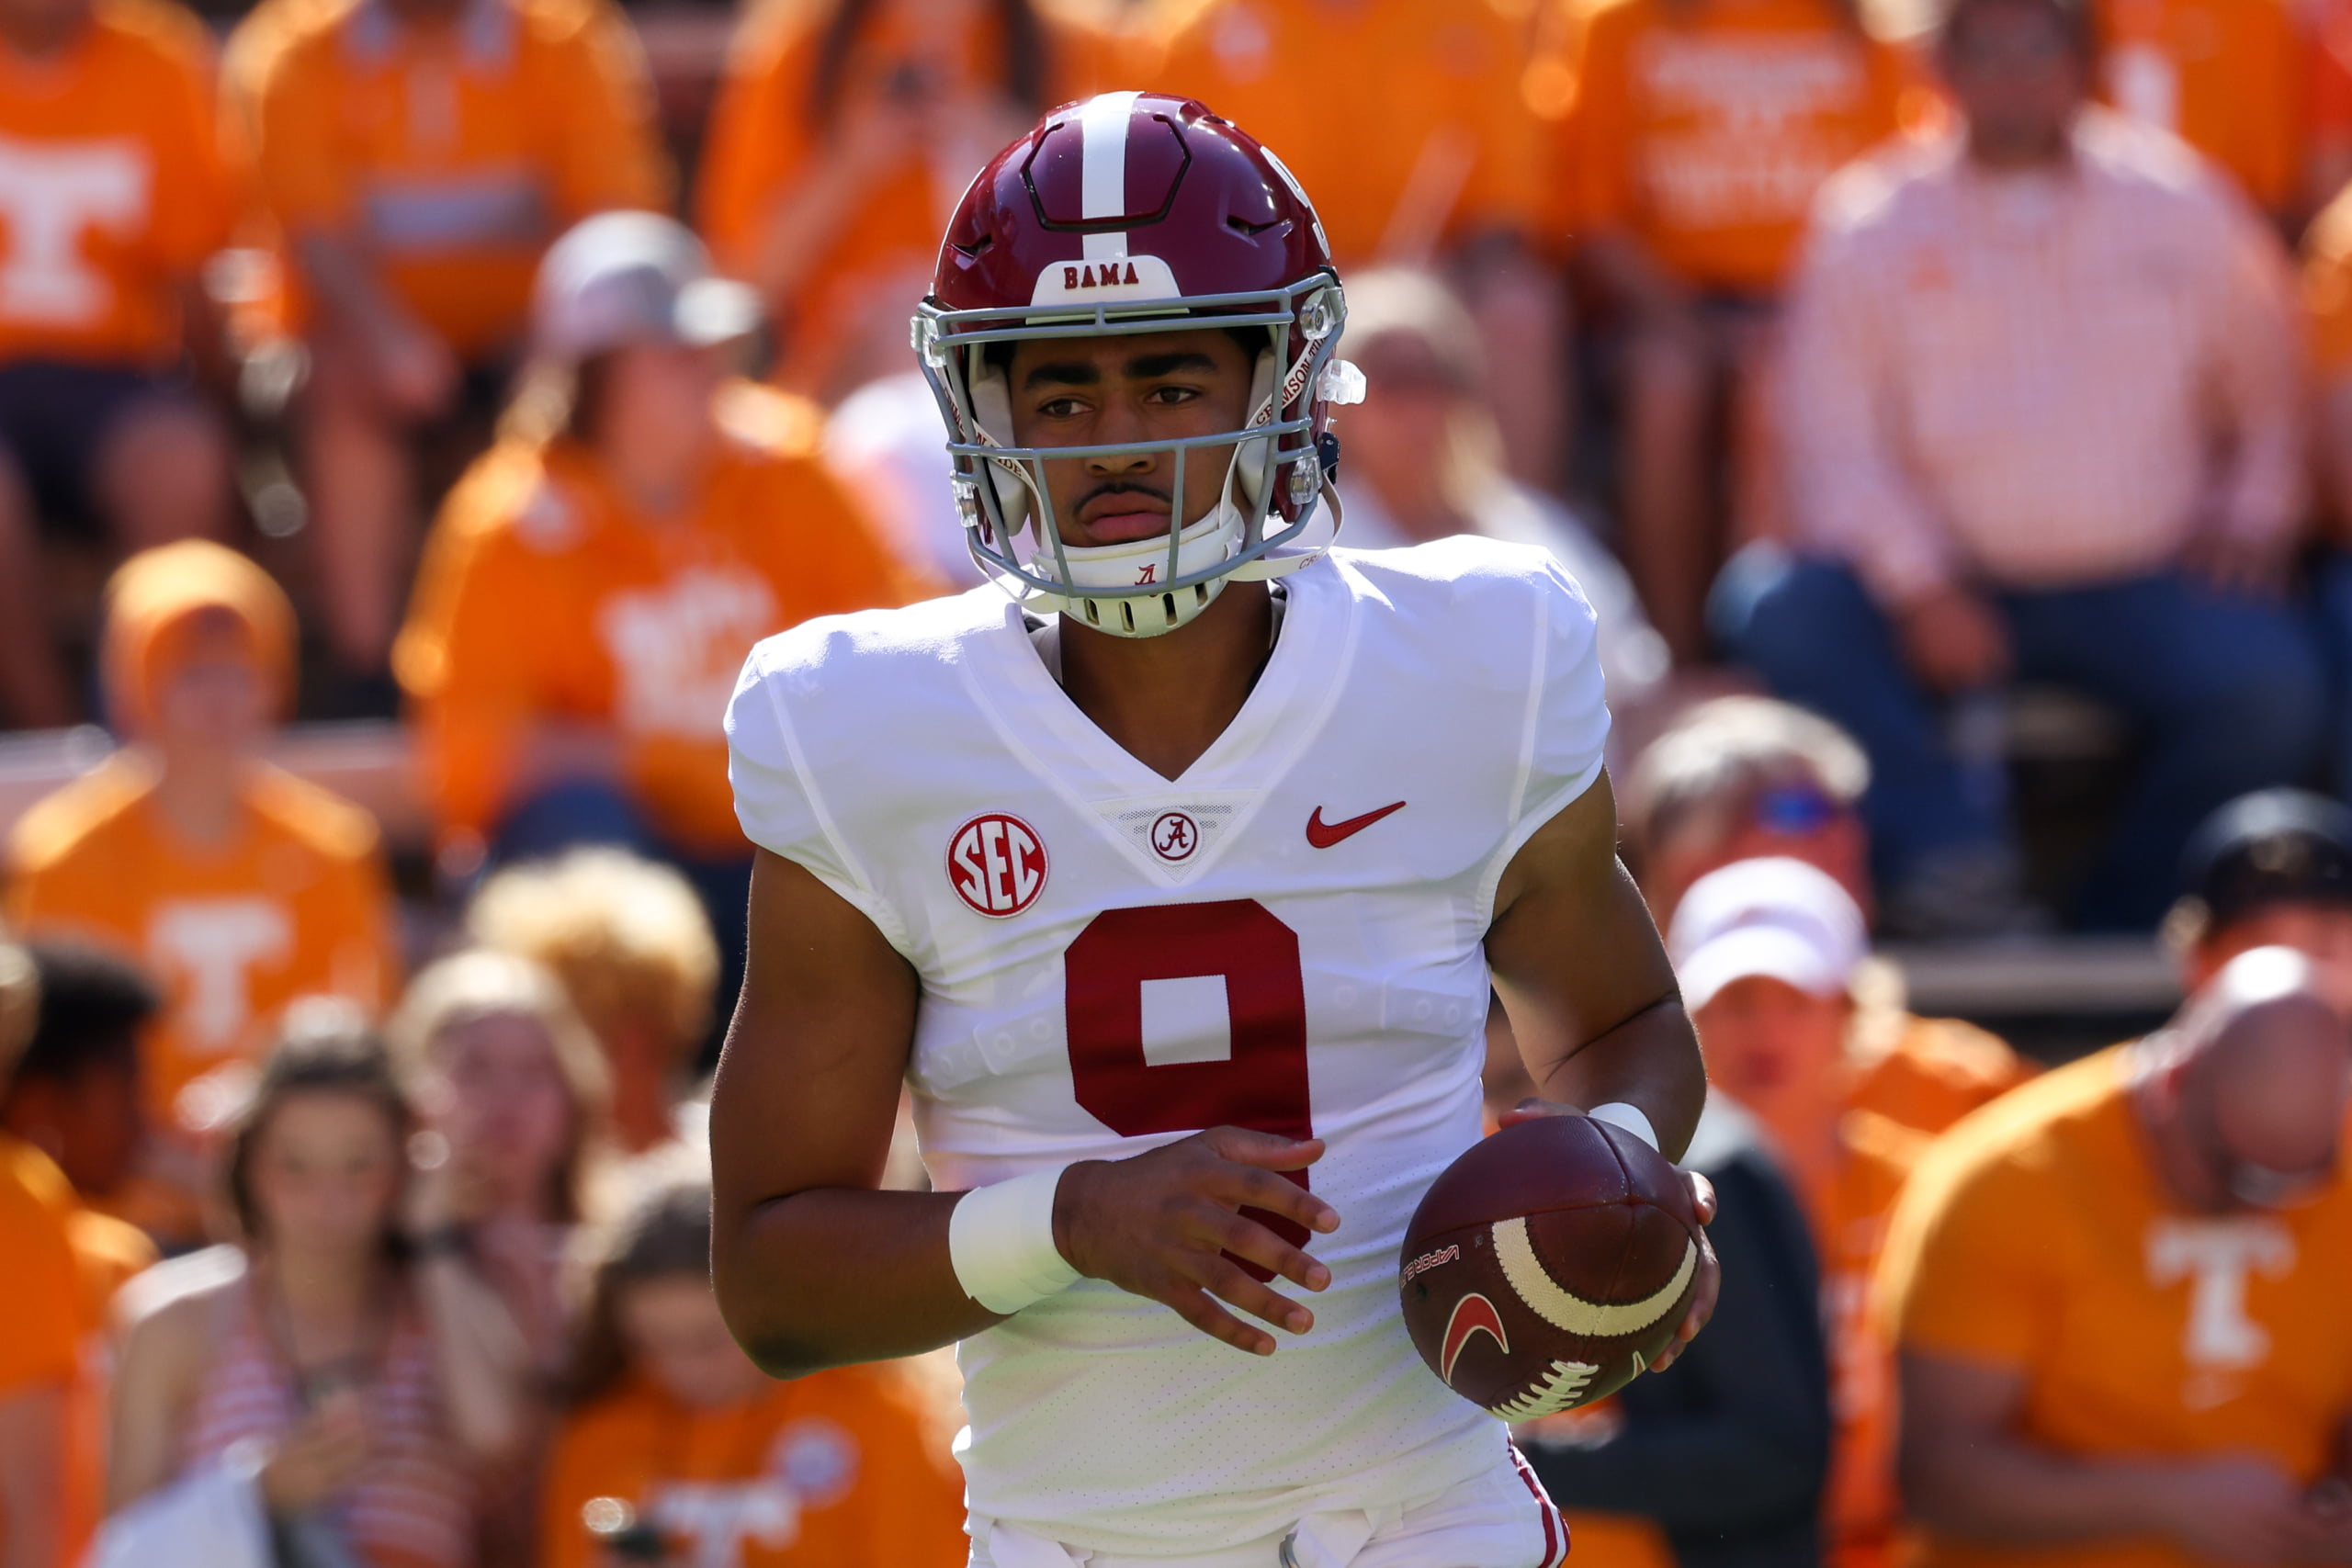 2023 NFL Draft QB rankings: Bryce Young leads best quarterback prospects in NFL Draft